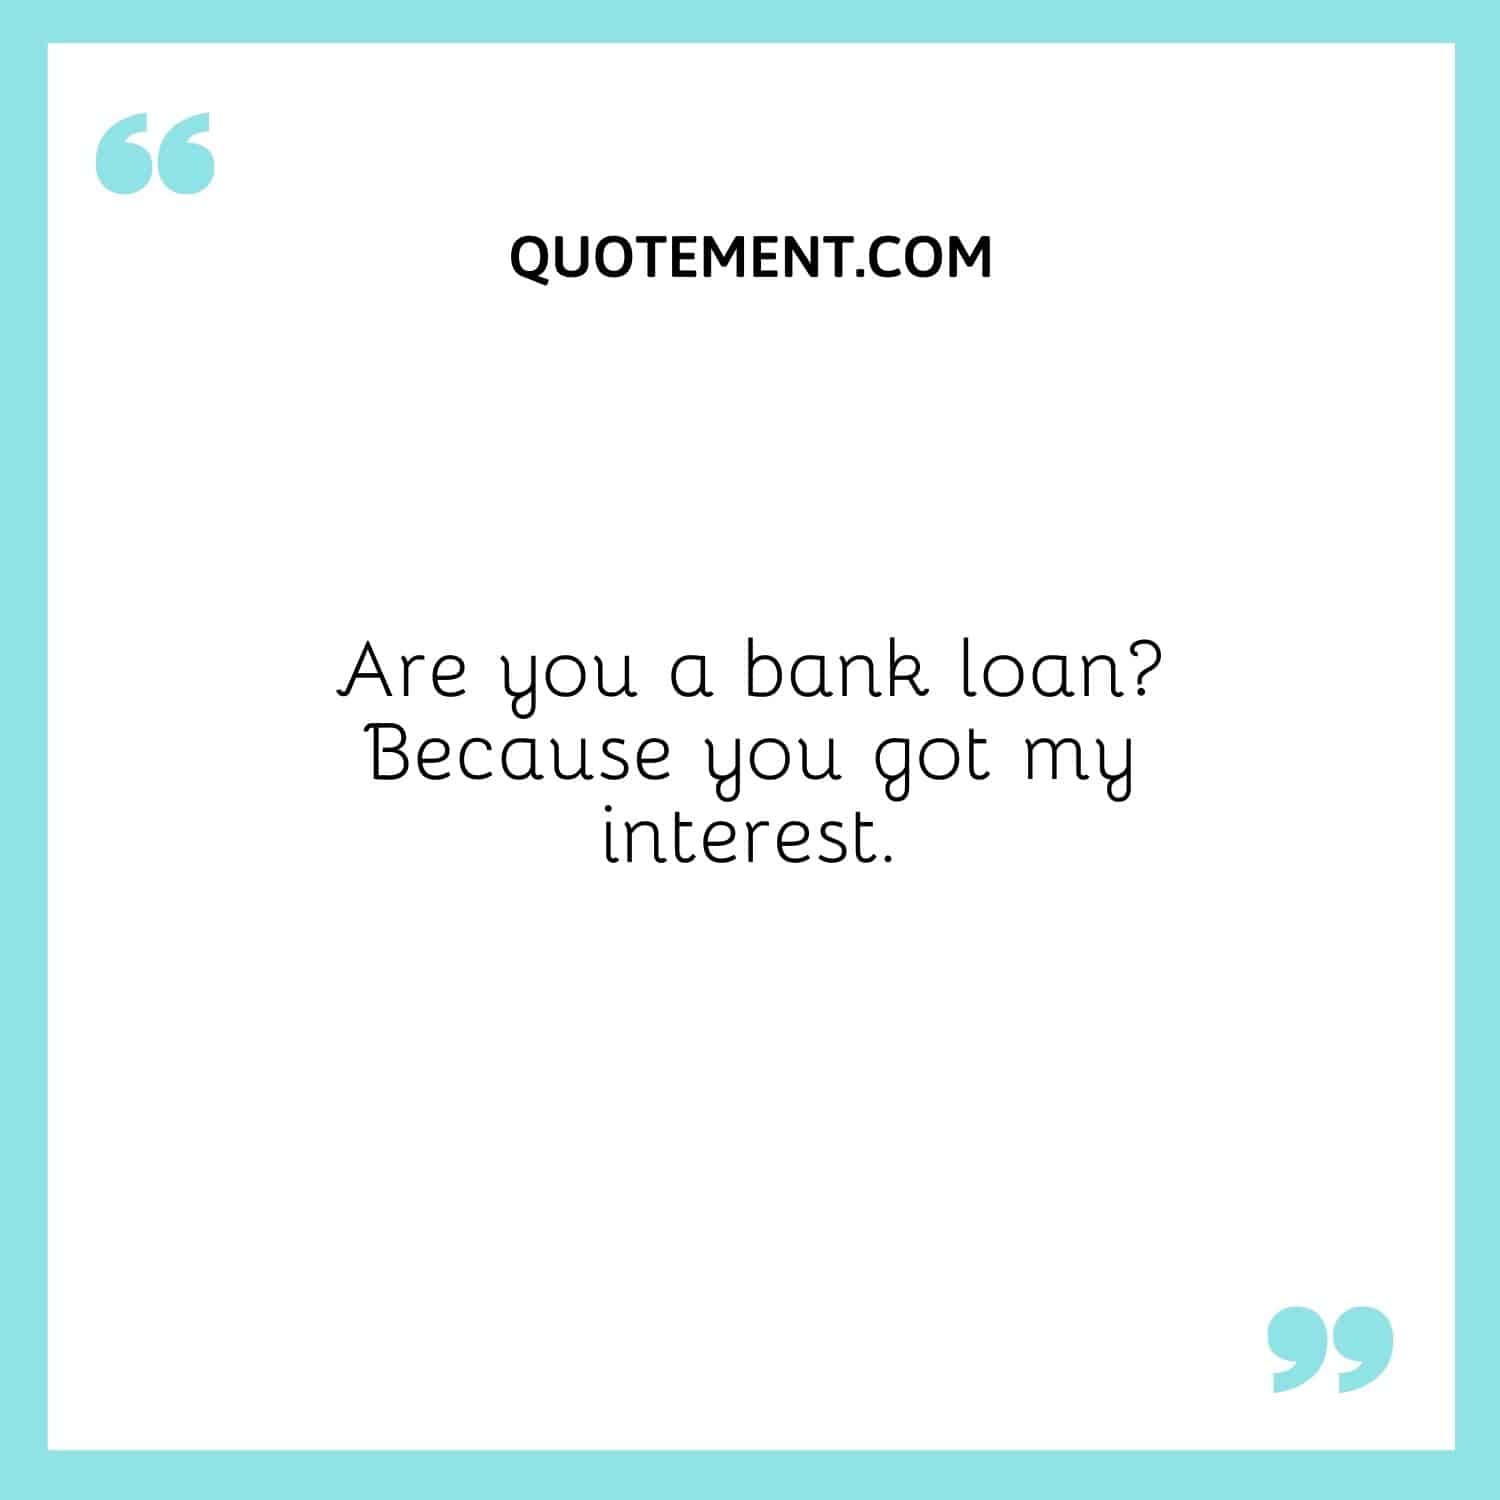 Are you a bank loan